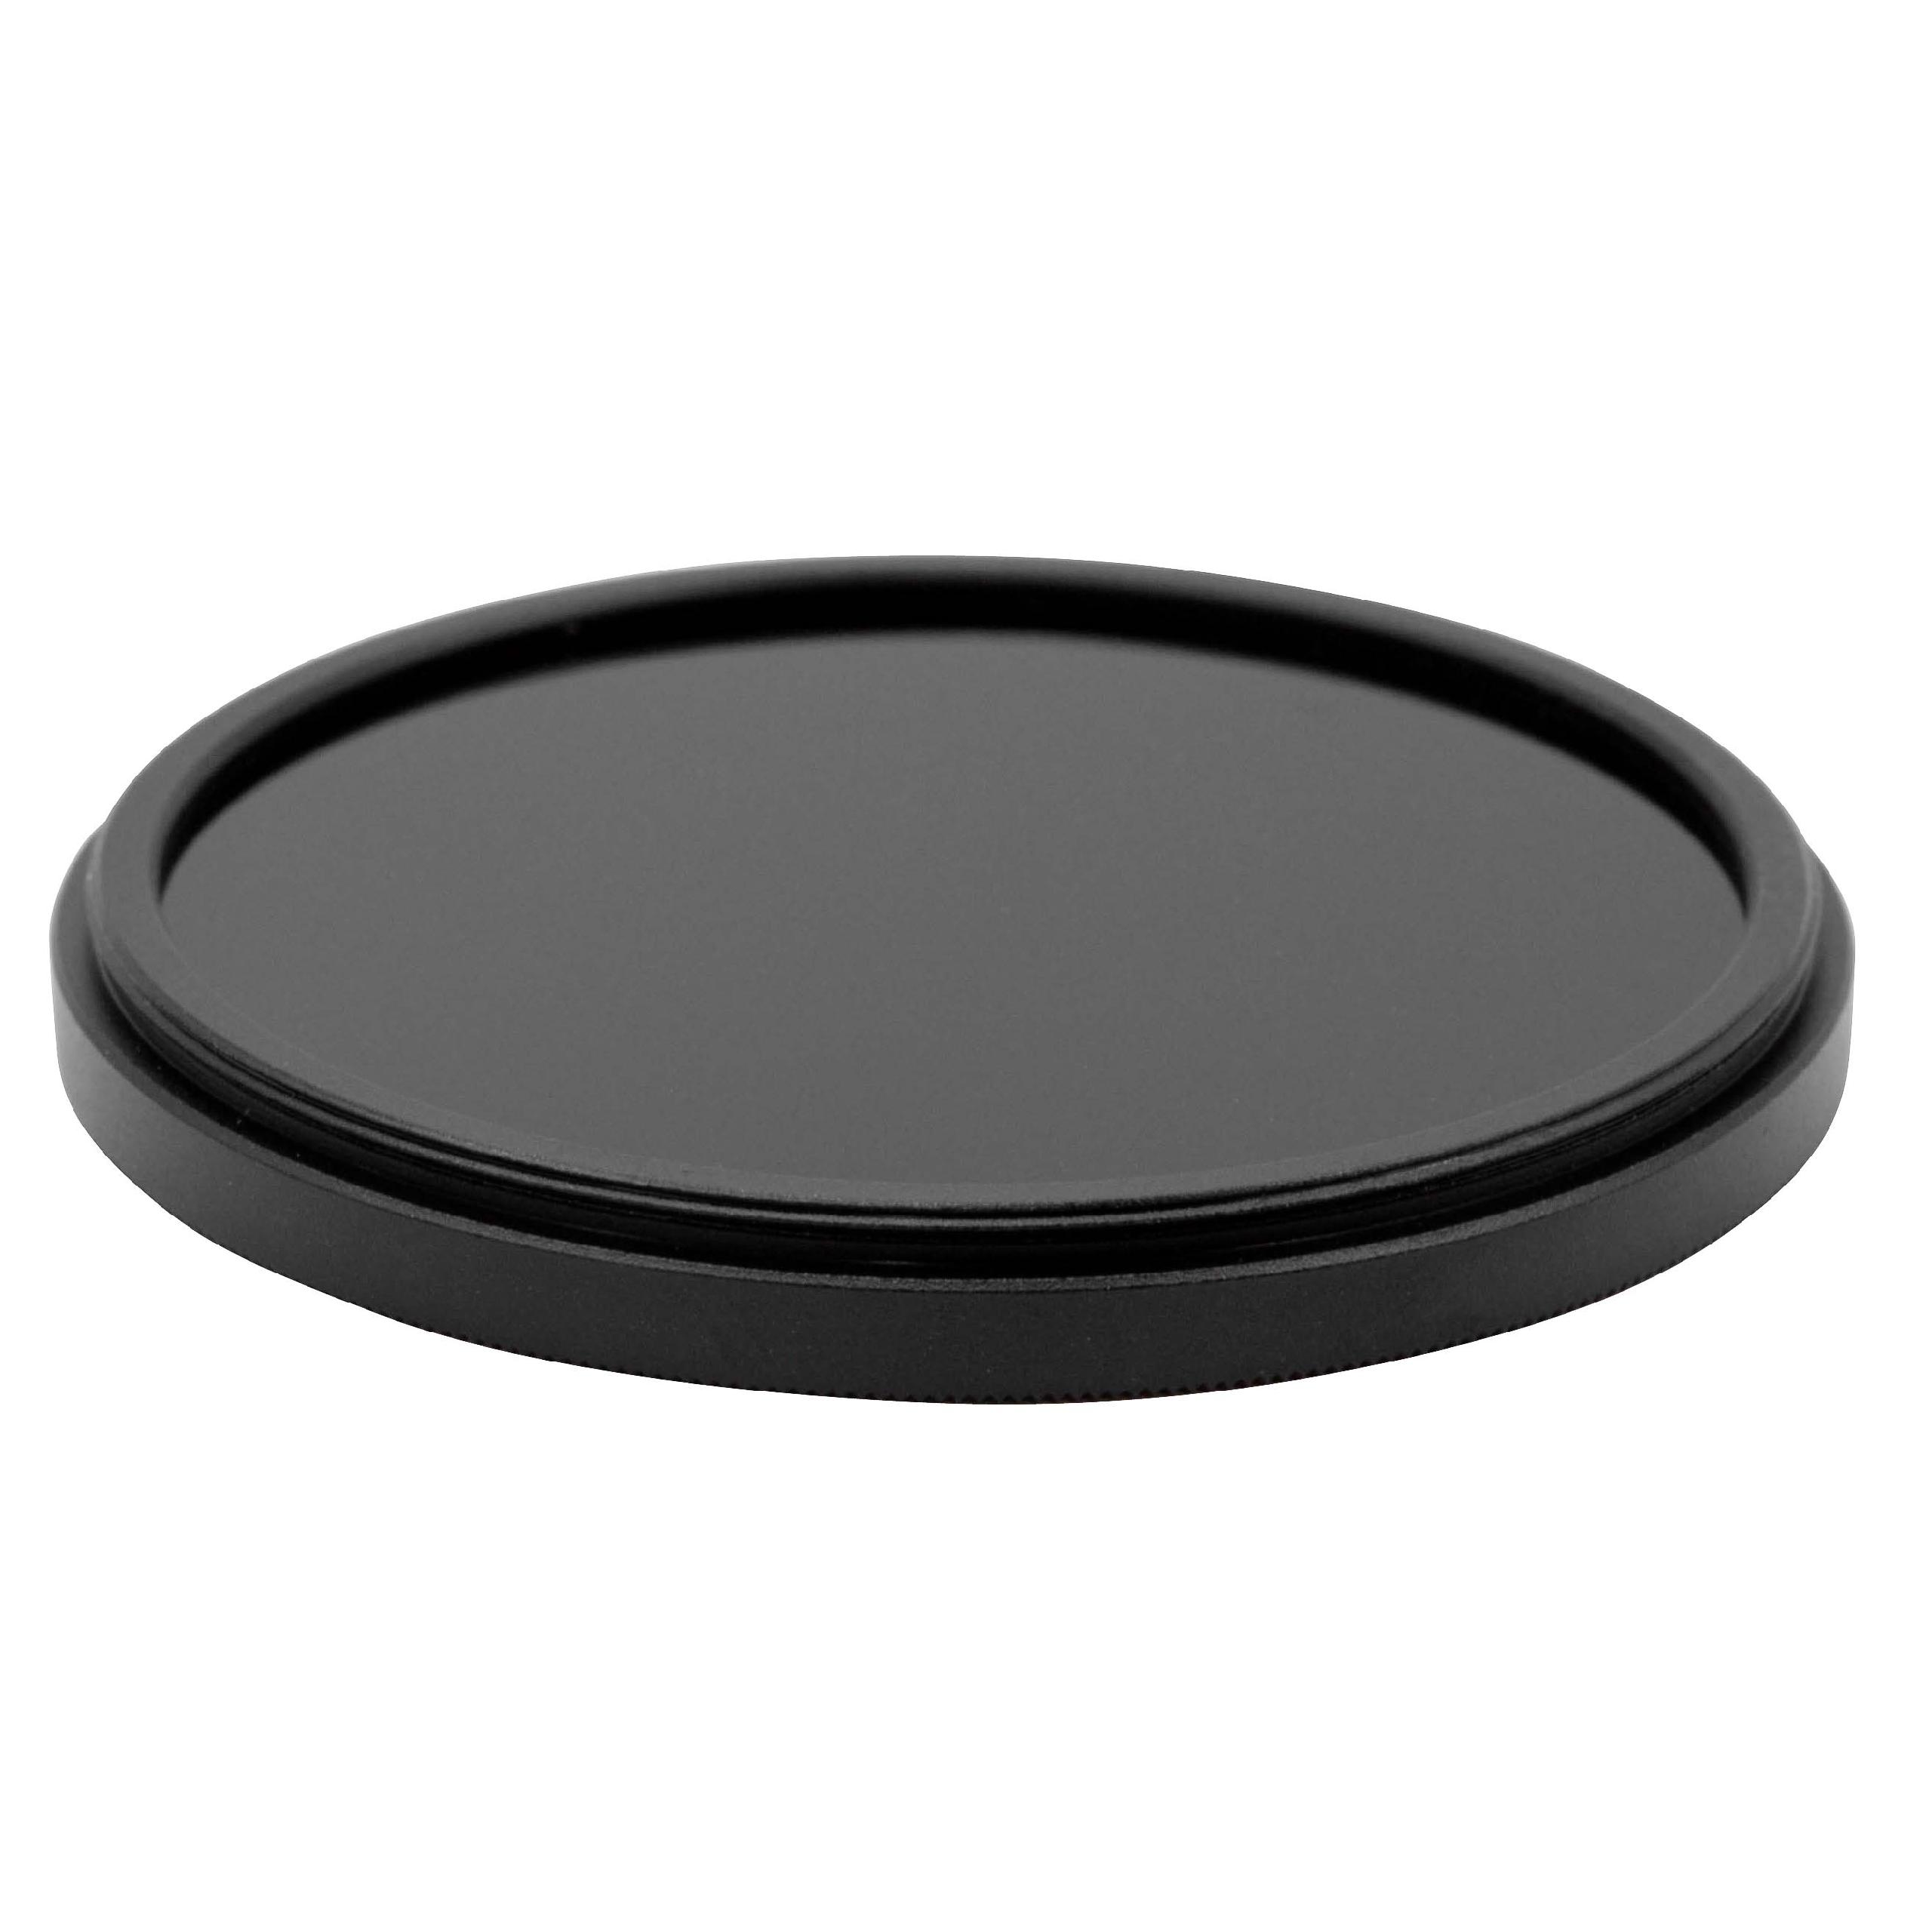 Universal ND Filter ND 1000 suitable for Camera Lenses with 58 mm Filter Thread - Grey Filter